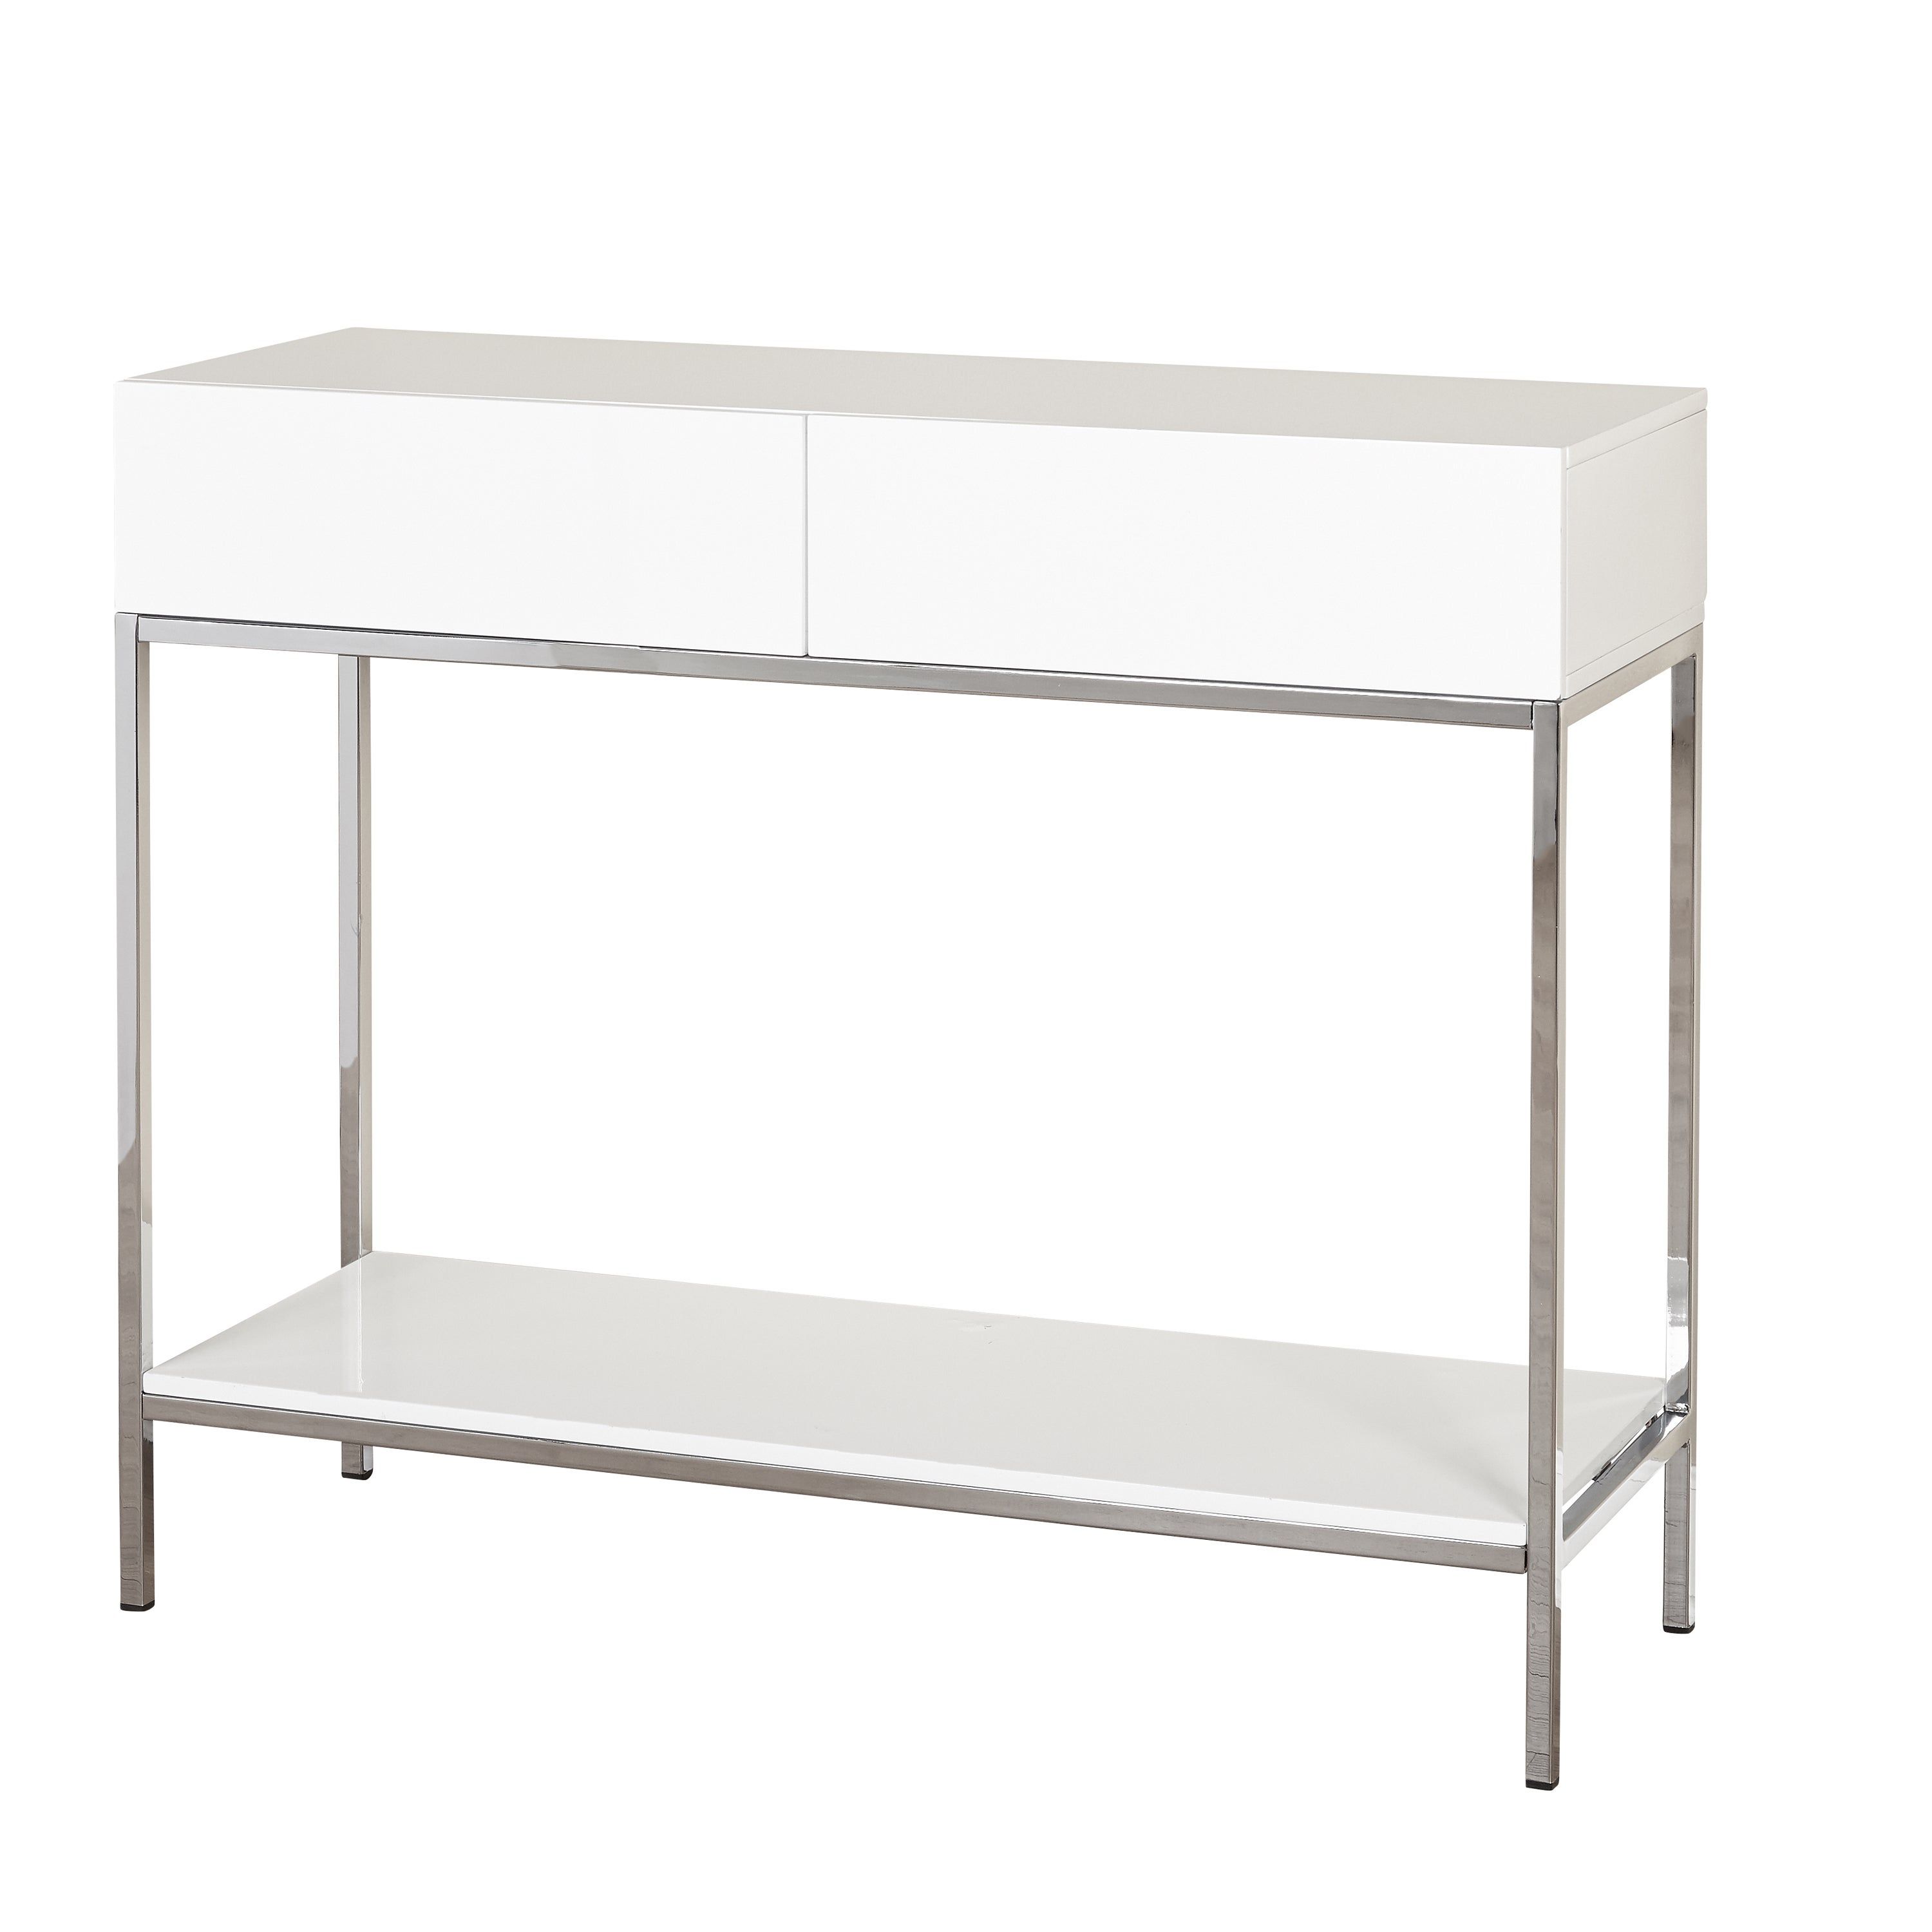 Simple Living White Wood And Chrome Metal High Gloss Console Table Regarding White Wood And Chrome Metal High Gloss Buffets (View 2 of 30)